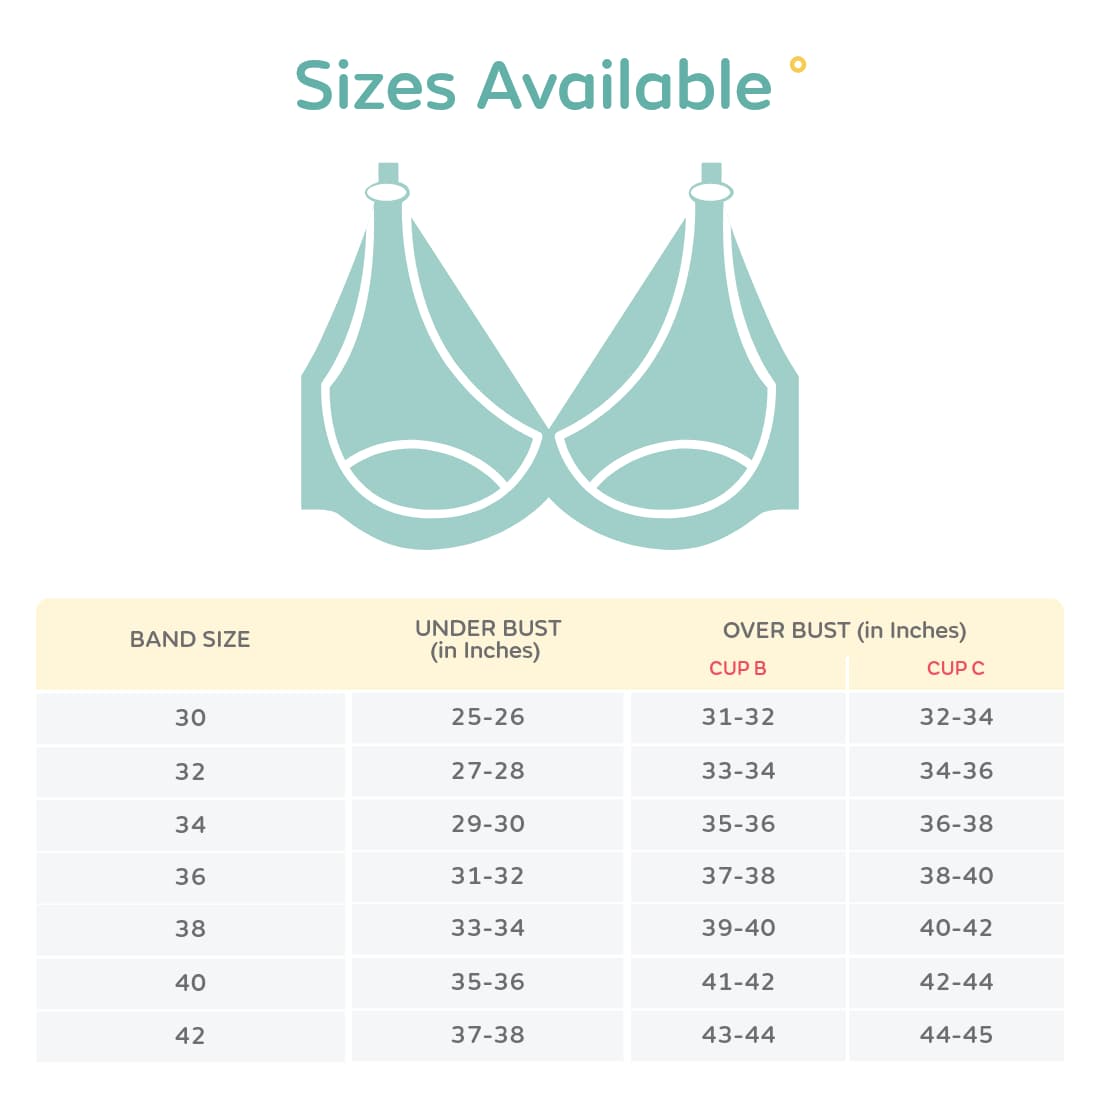 Mylo Maternity/Nursing Bras Non-Wired, Non-Padded - Pack of 3 with free Bra Extender (Classic Black, Classic White, Magnolia Cream) 36 C